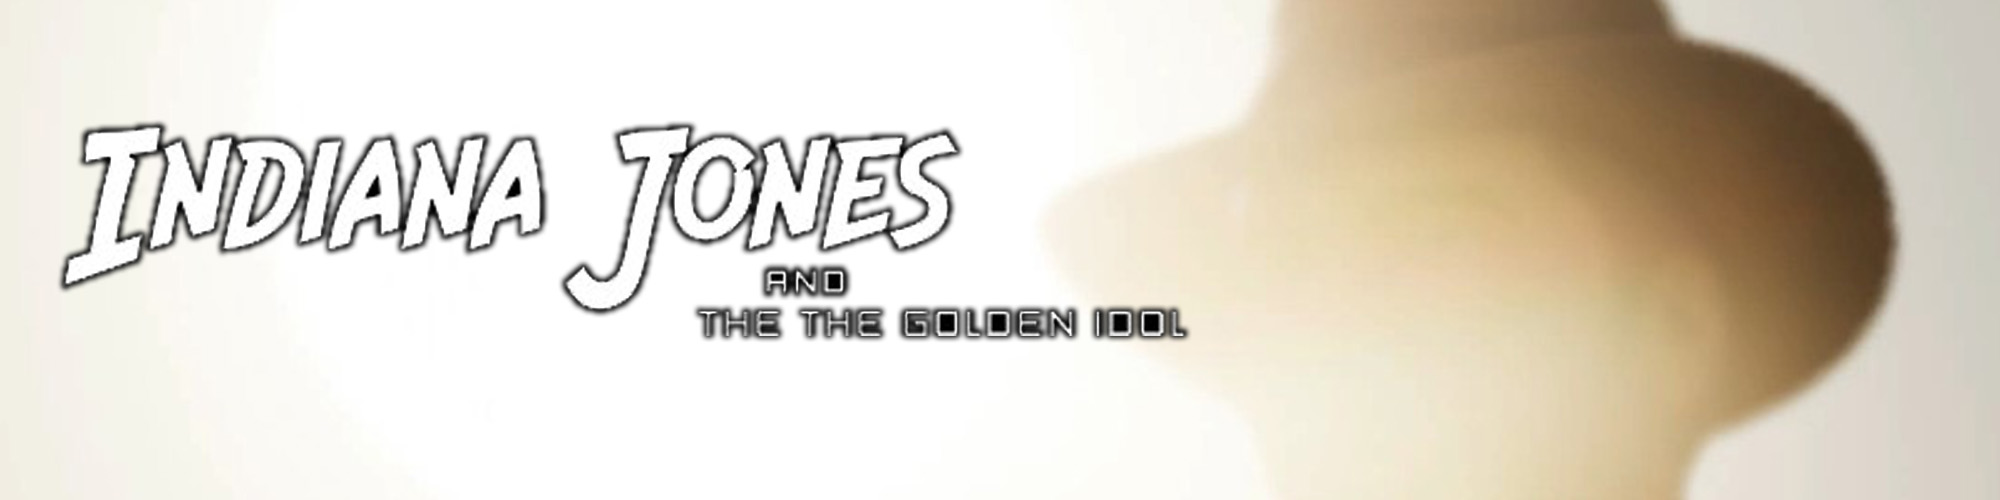 Indiana Joses: The Golden Idol (DEMO)